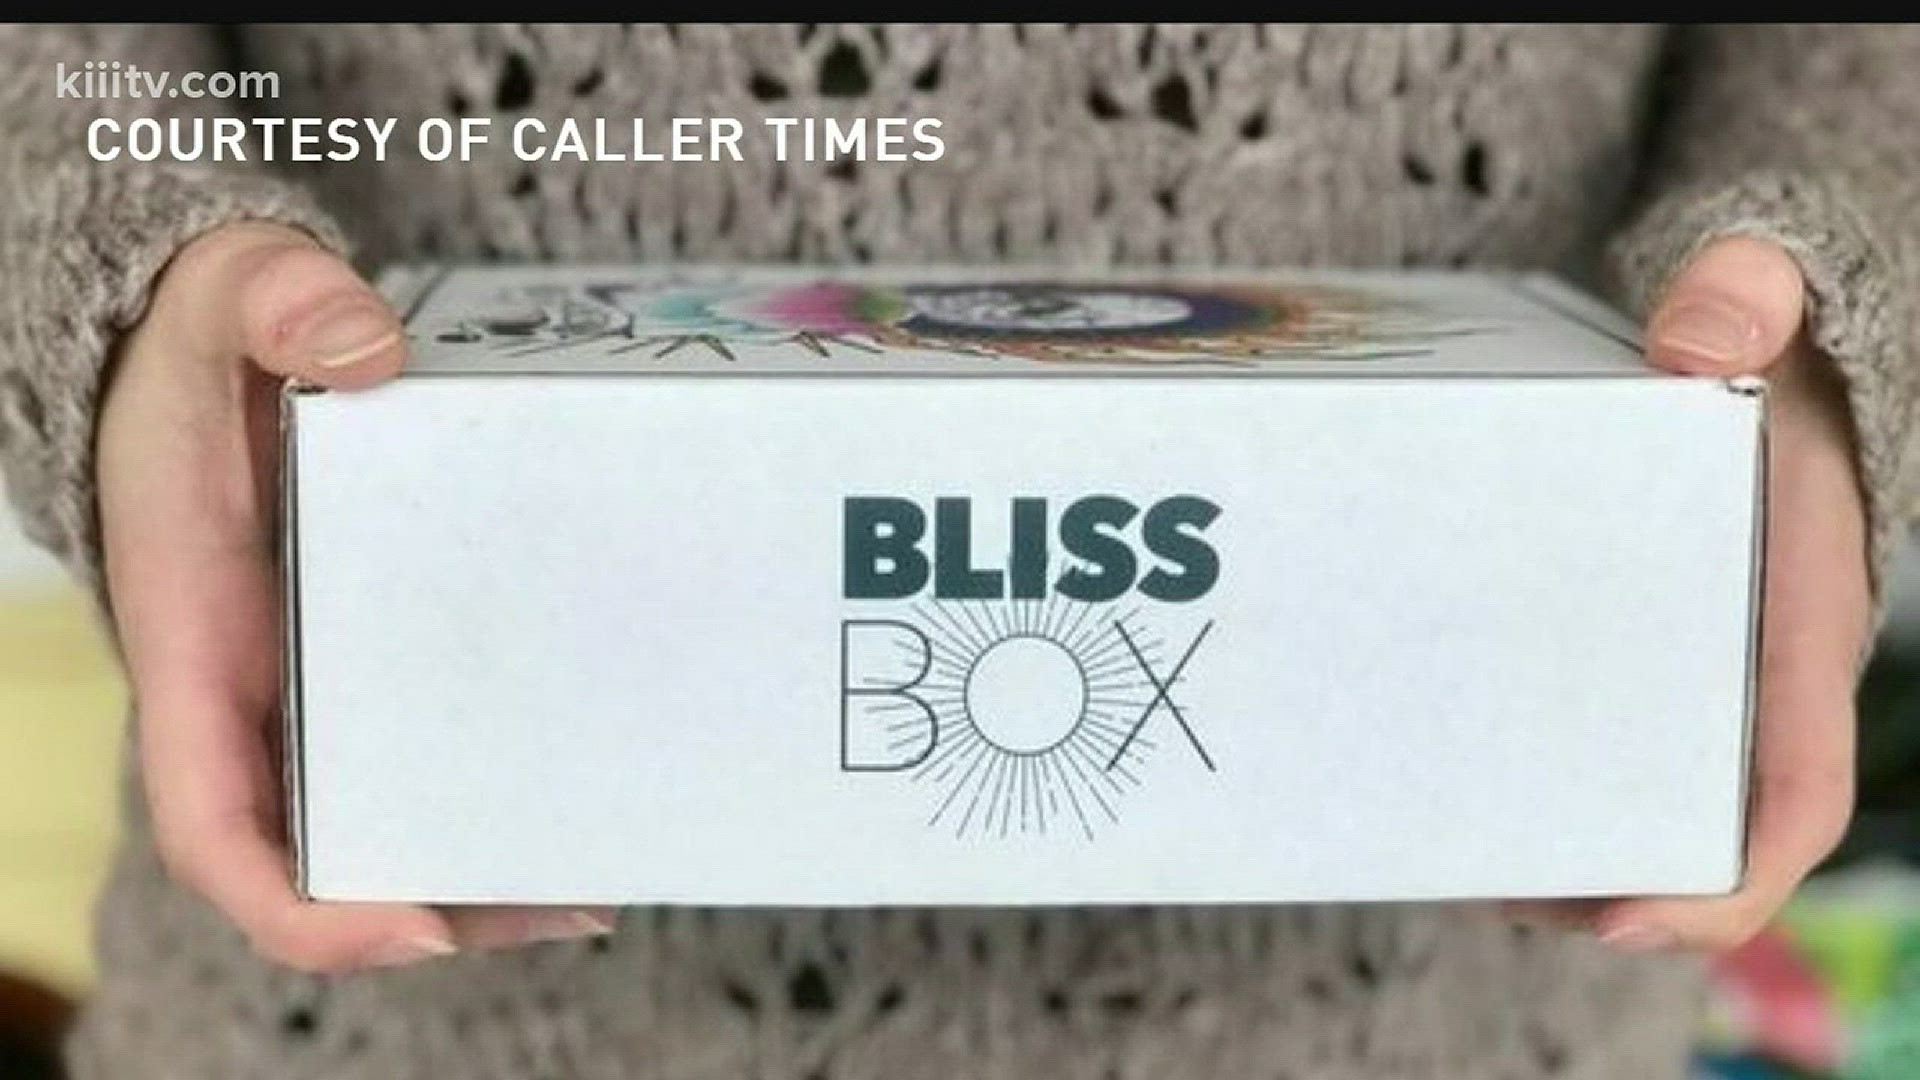 Corpus Christi native, Sara Dolson created the subscription services a way for busy adults to enjoy the amenities of Corpus Christi all in one box.